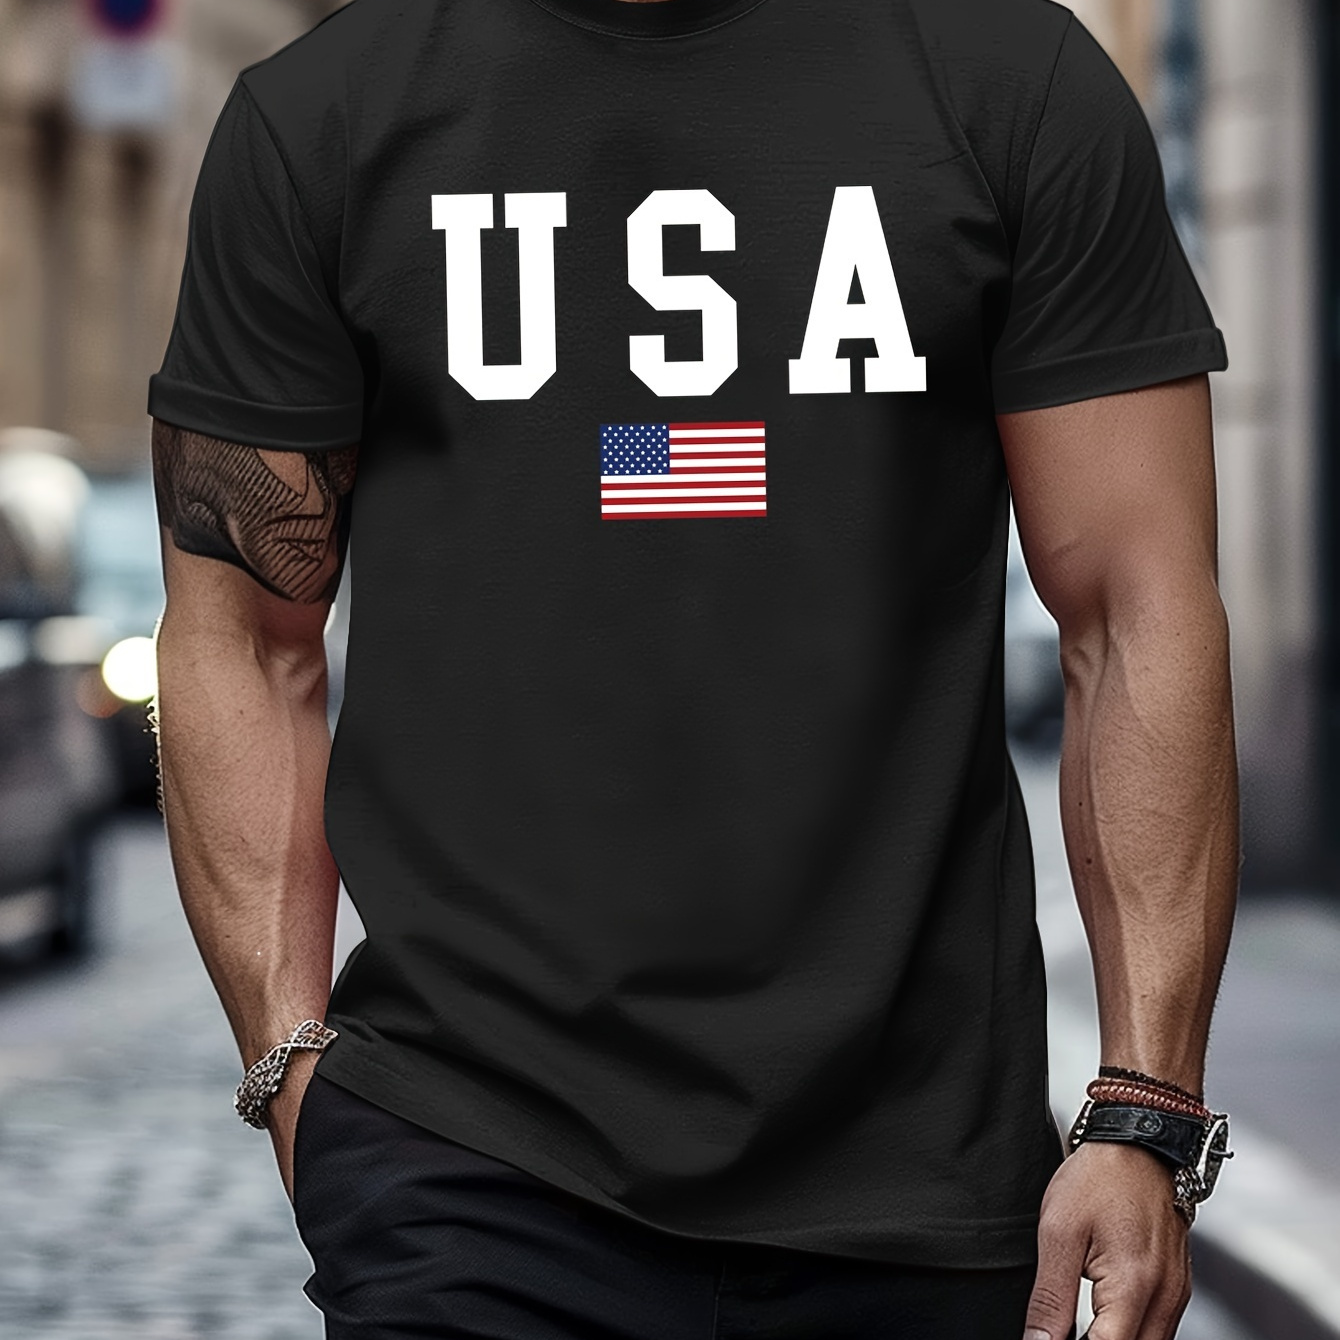 

usa" With American National Flag Graphic Print, Men's Novel Design T-shirt, Casual Comfy Tees For Summer, Men's Clothing Tops For Daily Activities